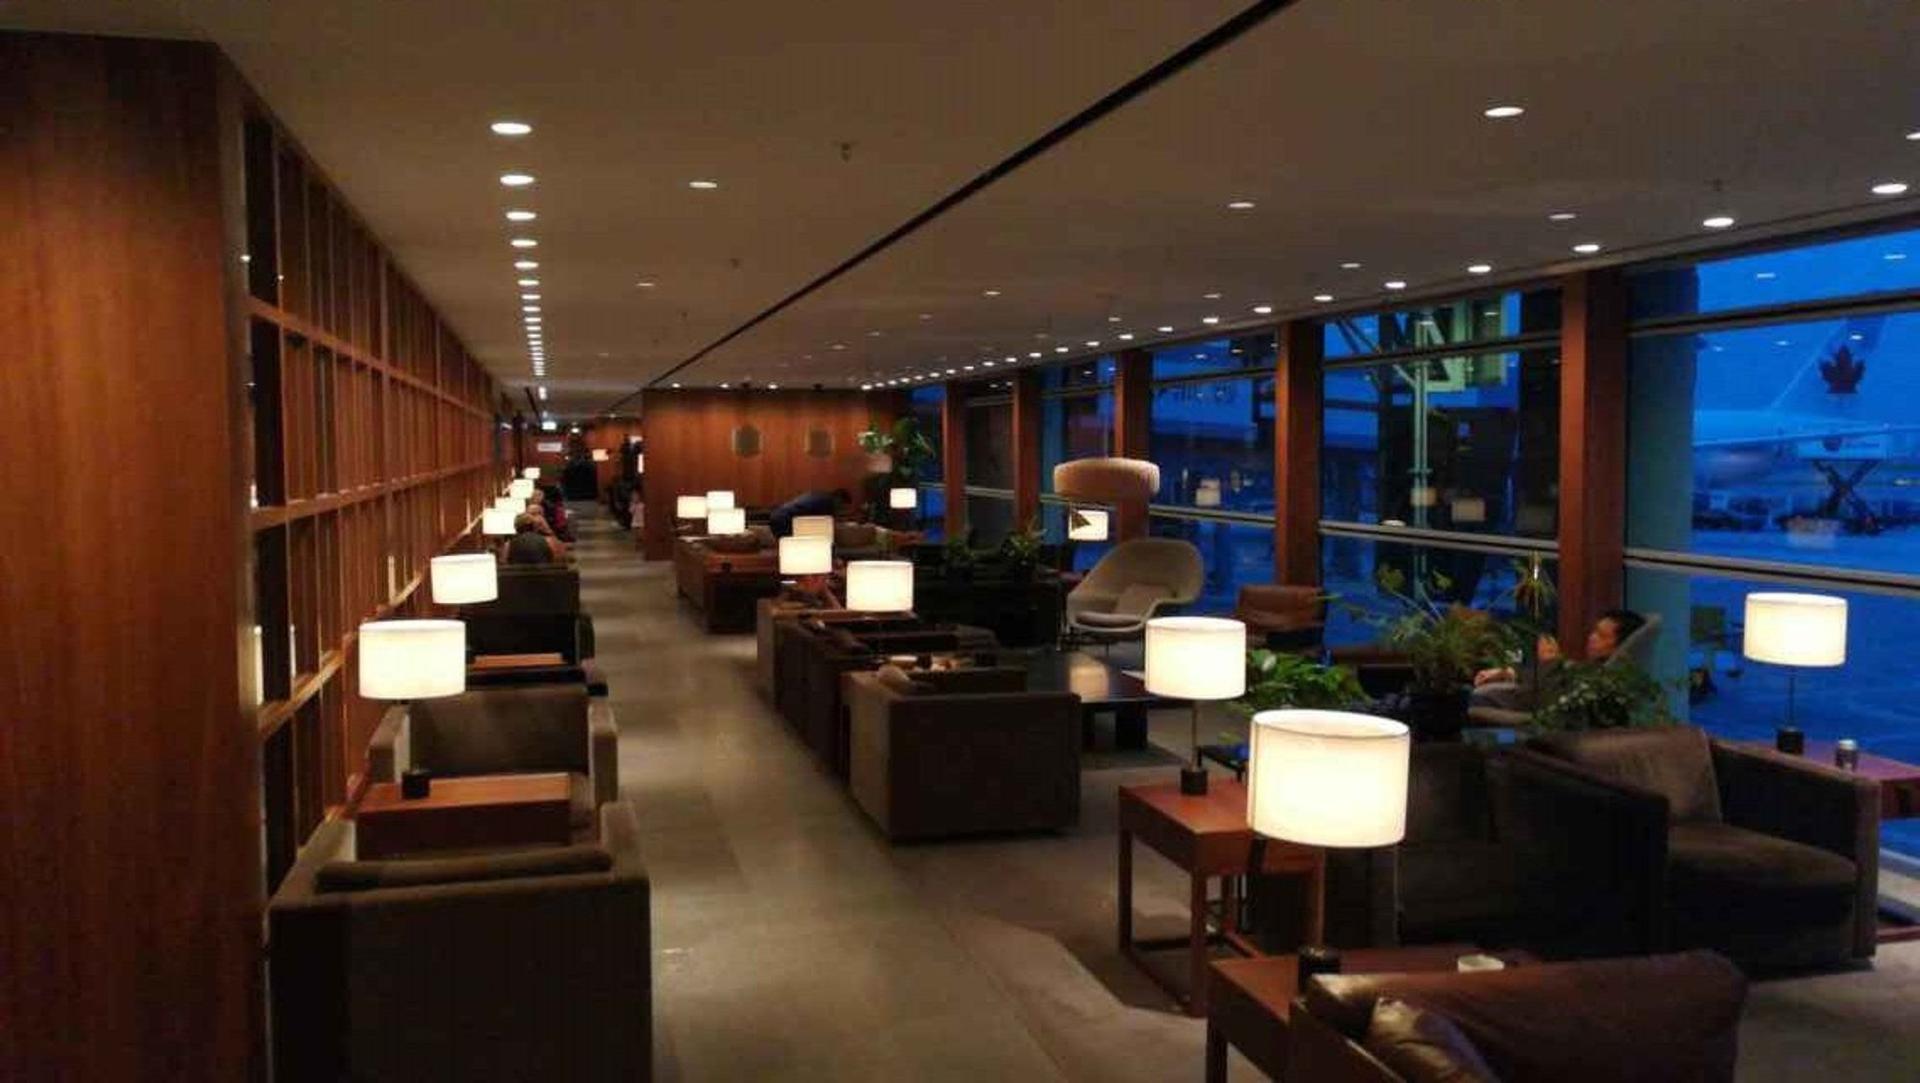 Cathay Pacific The Pier Business Class Lounge image 56 of 61